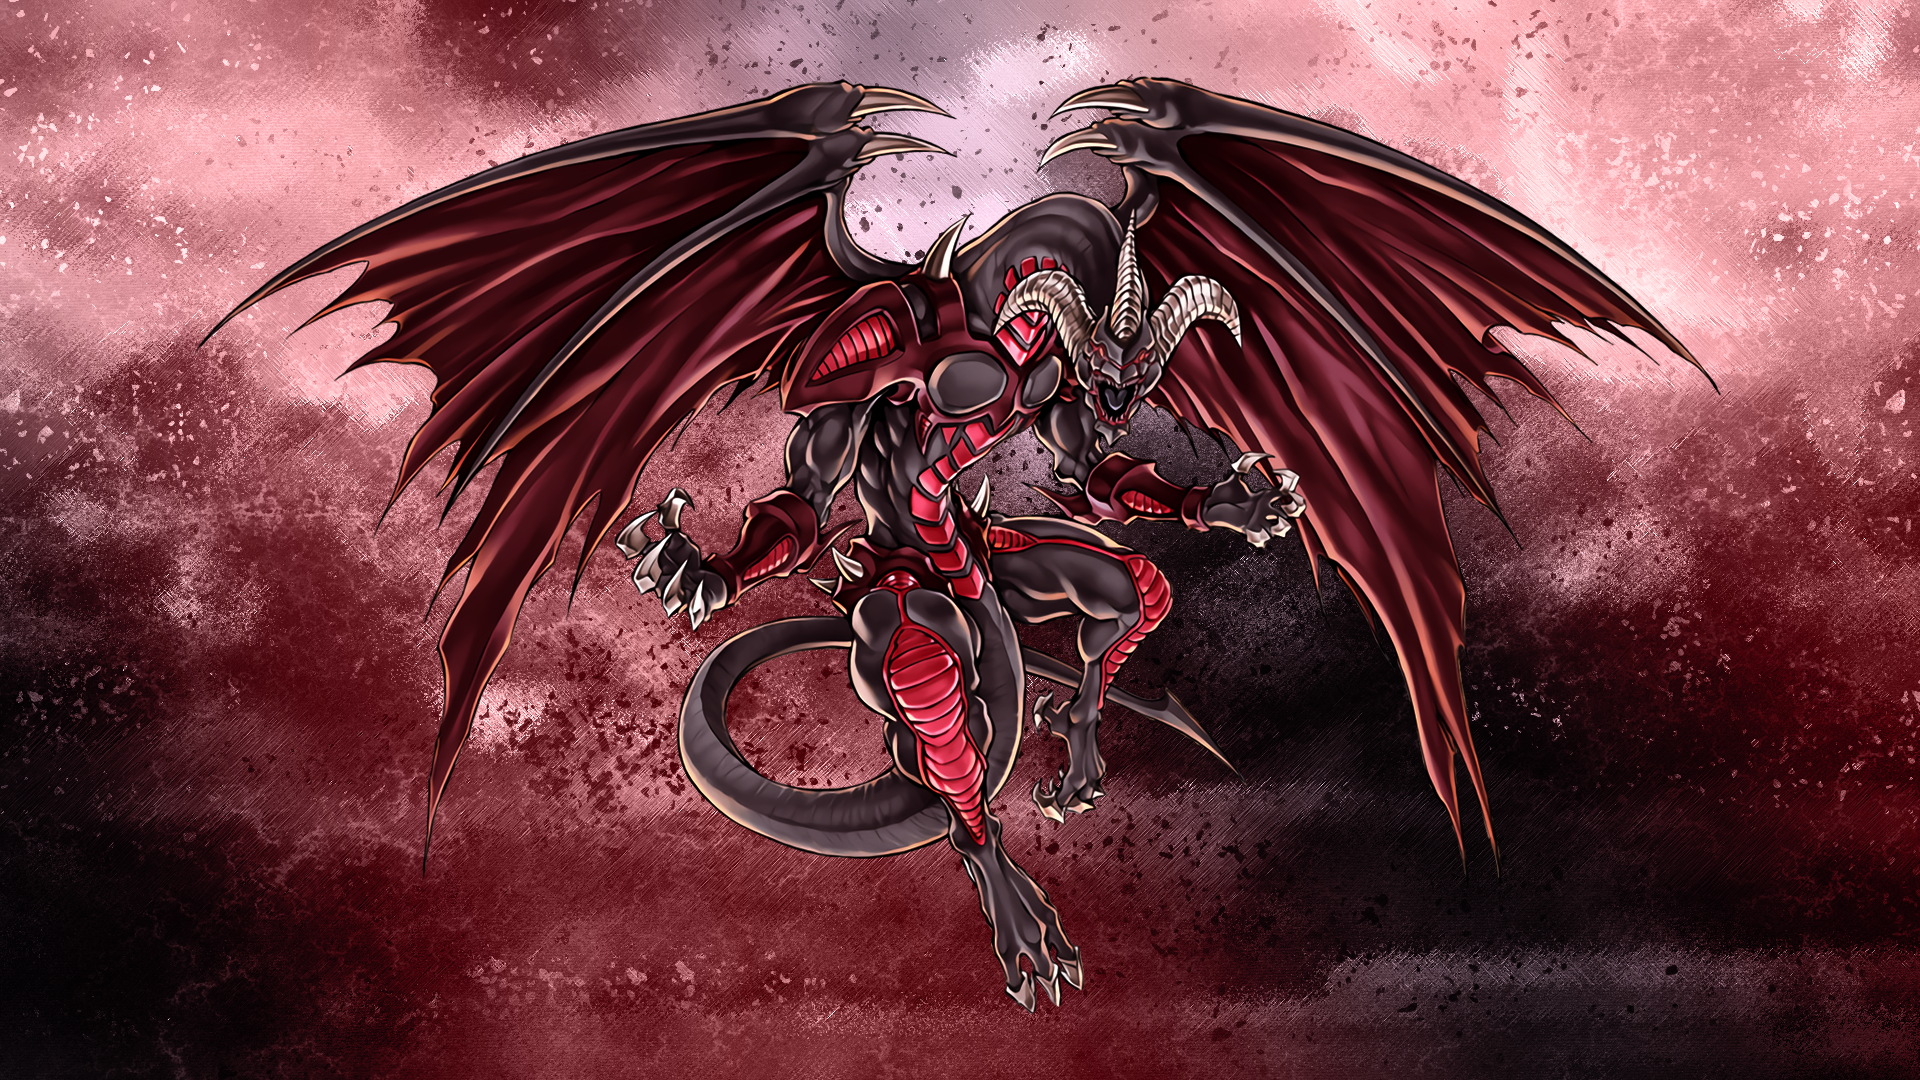 Red Dragon Archfiend Wallpapers.